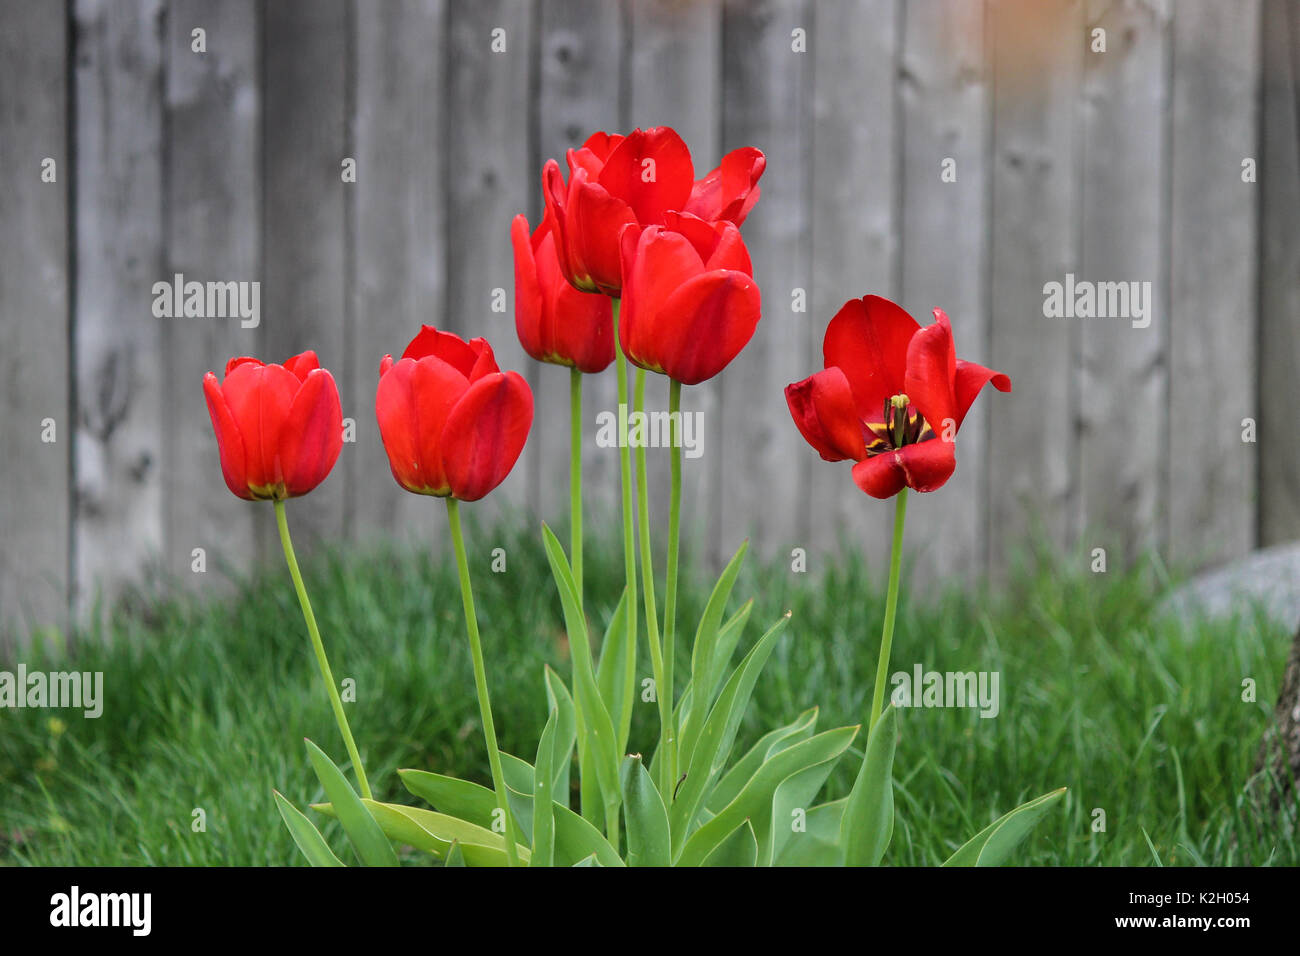 Red Tulips in Bloom Blurred Background Stock Photo